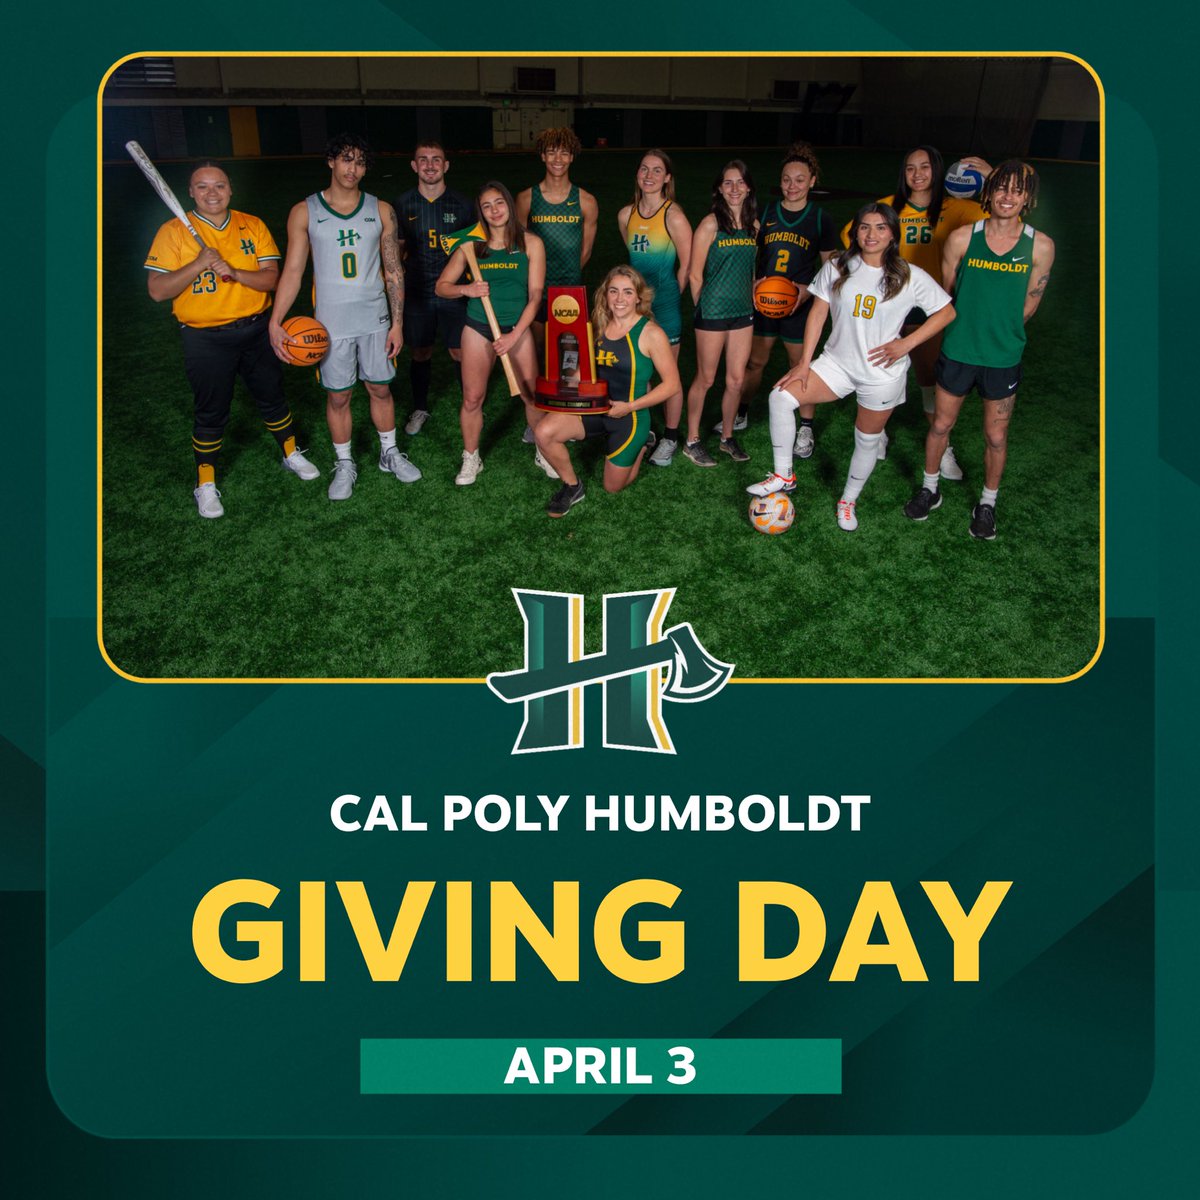 🚨TODAY’S THE DAY! #HumboldtGivingDay is here! All gifts have twice the impact! Use the link in our bio to double your gift and support student-athletes and their programs! #GoJacks🪓 #BoldyGiving #HumboldtGivesBack #HumboldtGivingDay #CalPolyHumboldt